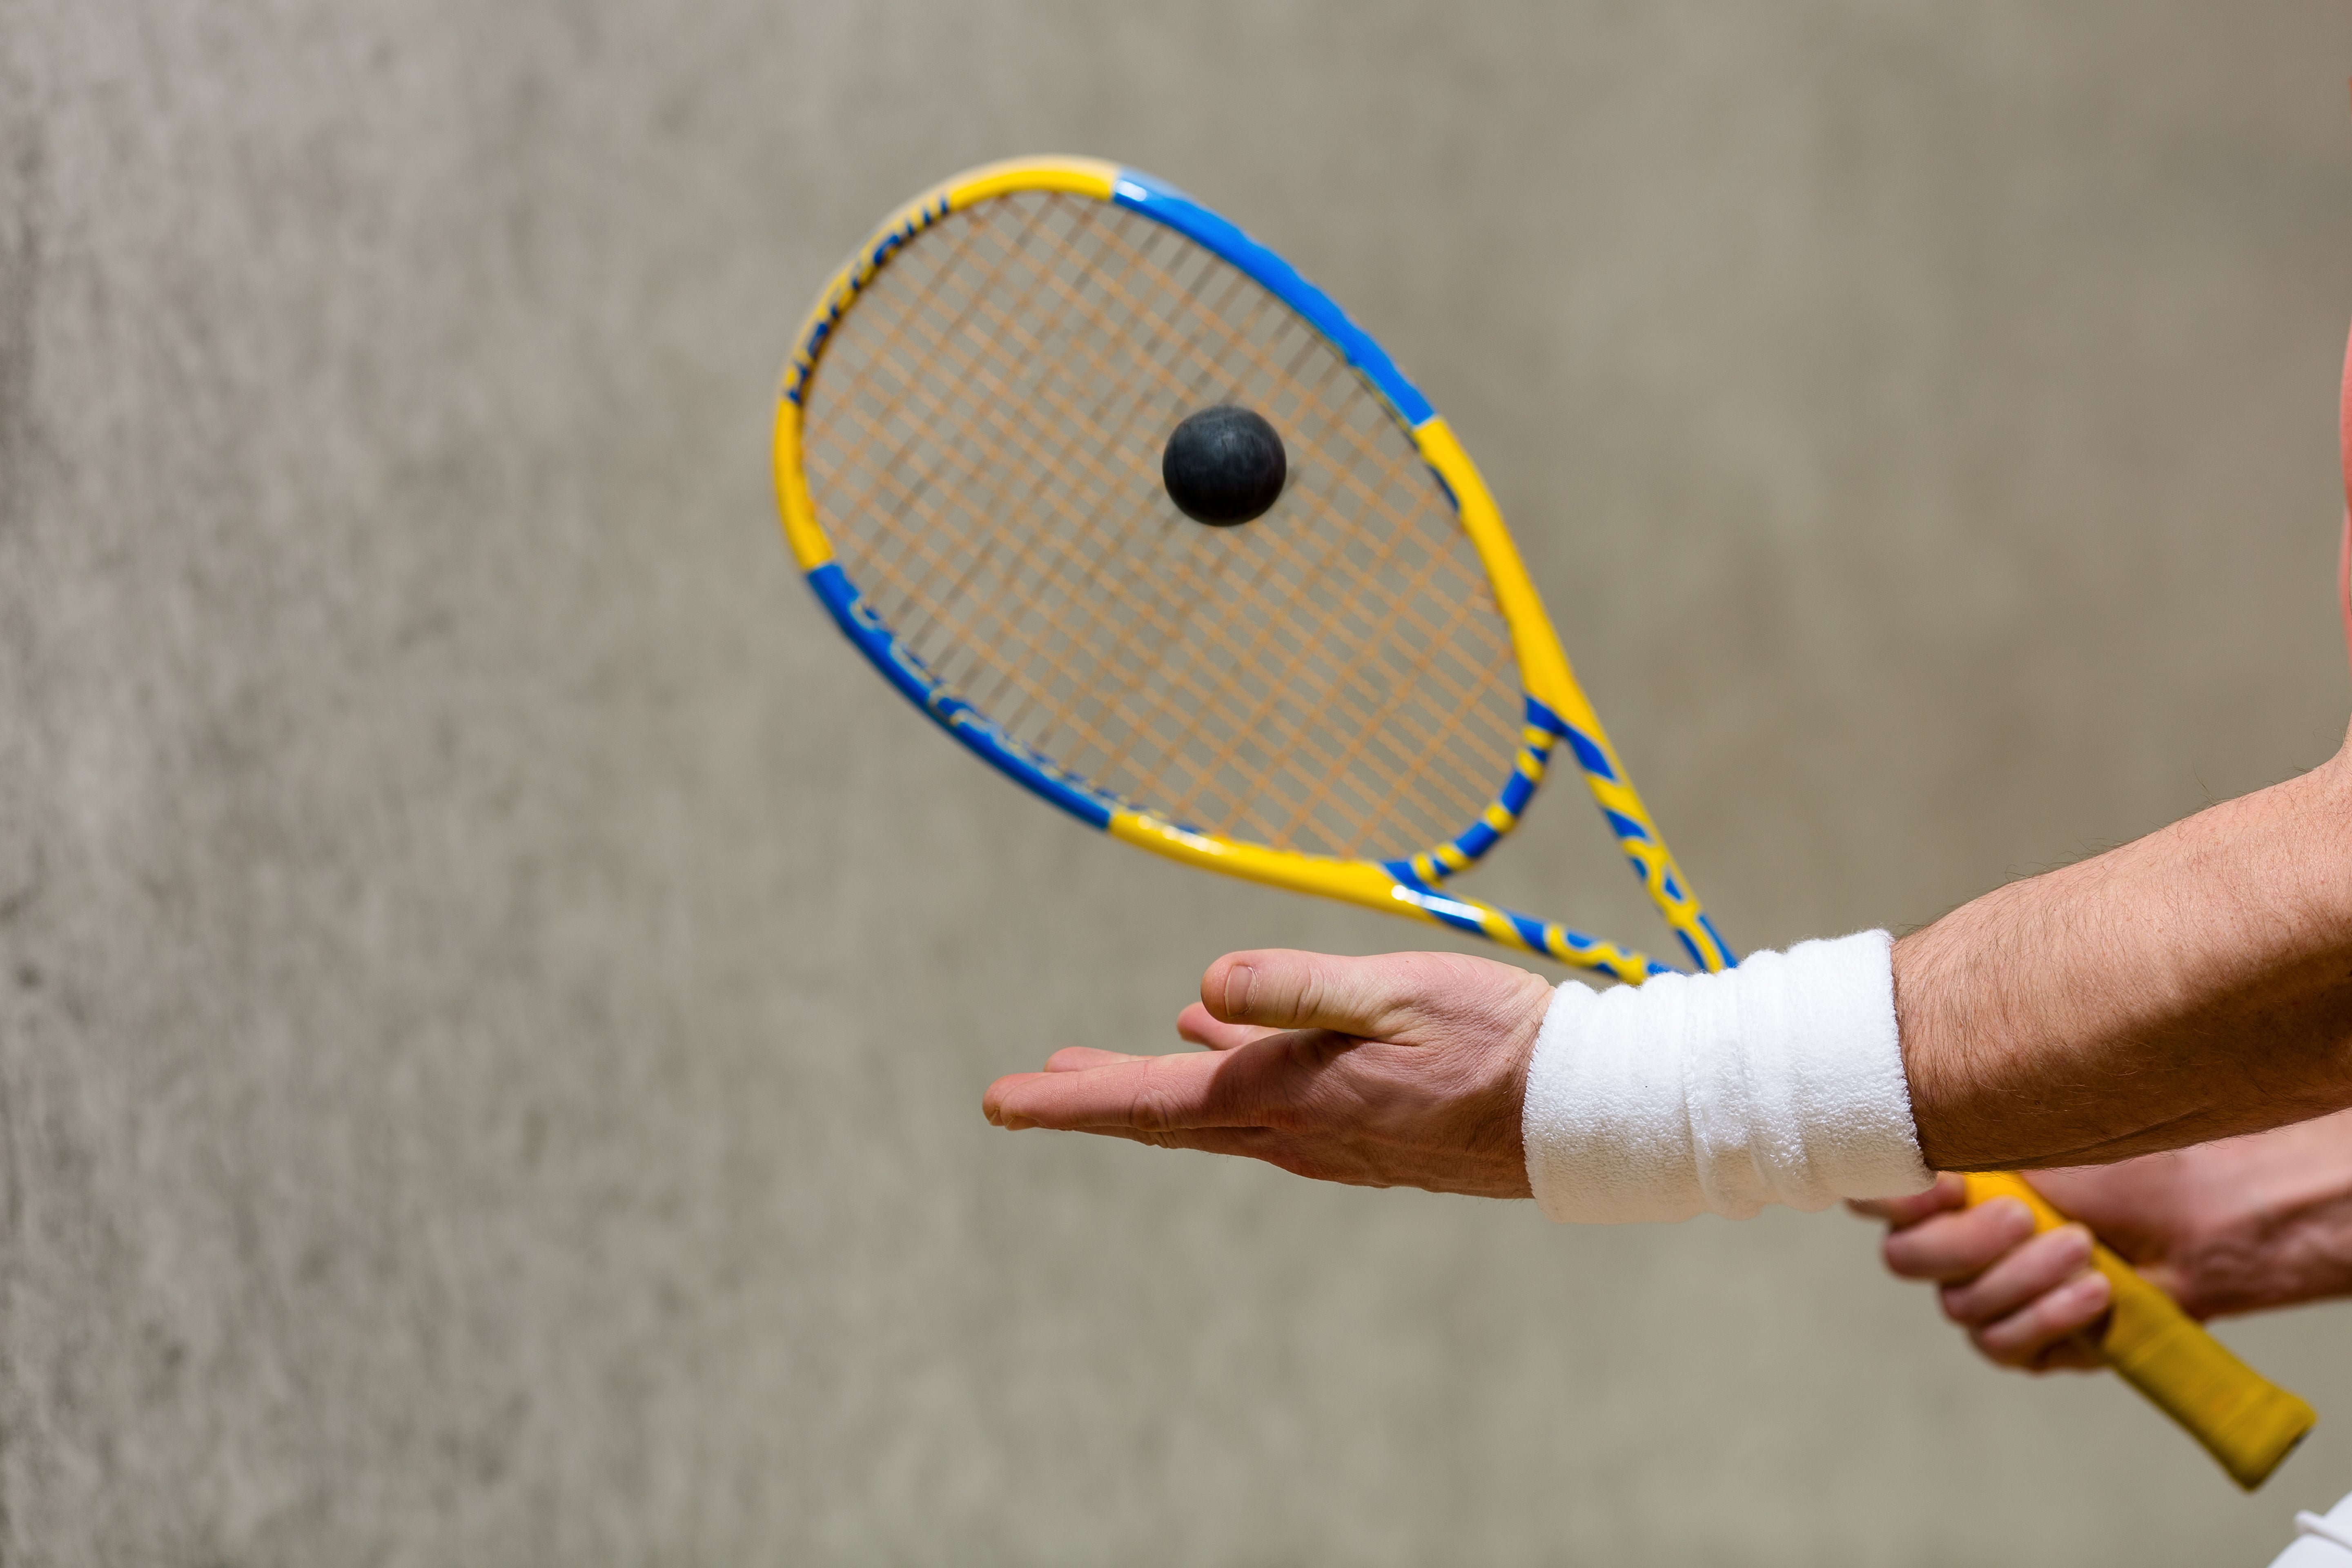 Best Racquetball Racquets to Buy in 2020 - Sportsglory